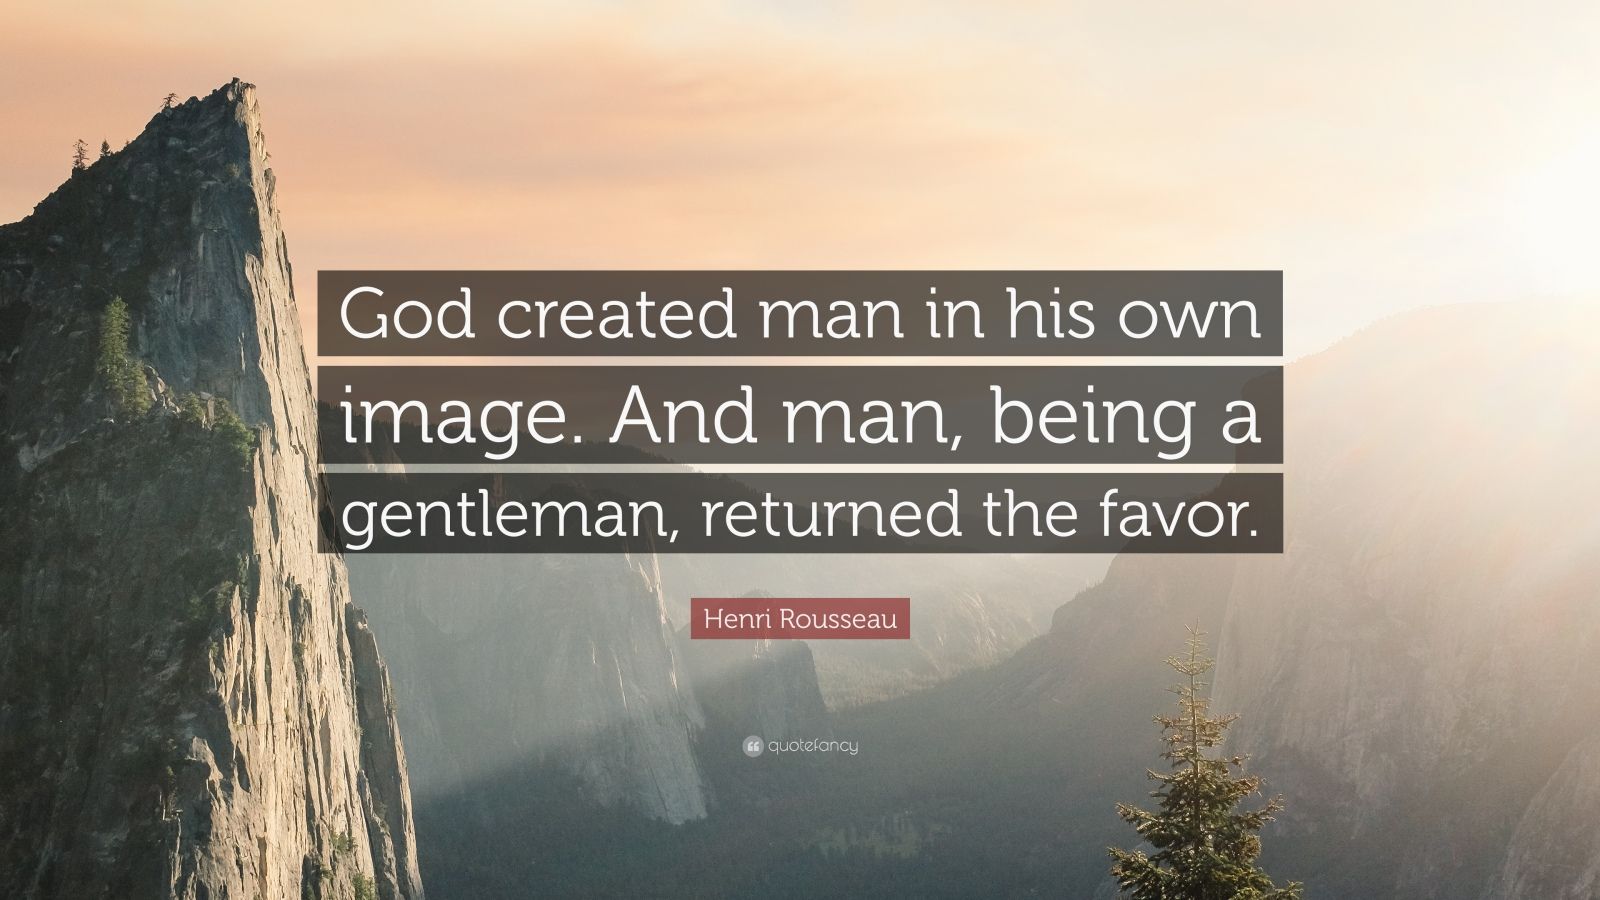 Henri Rousseau Quote “God created man in his own image